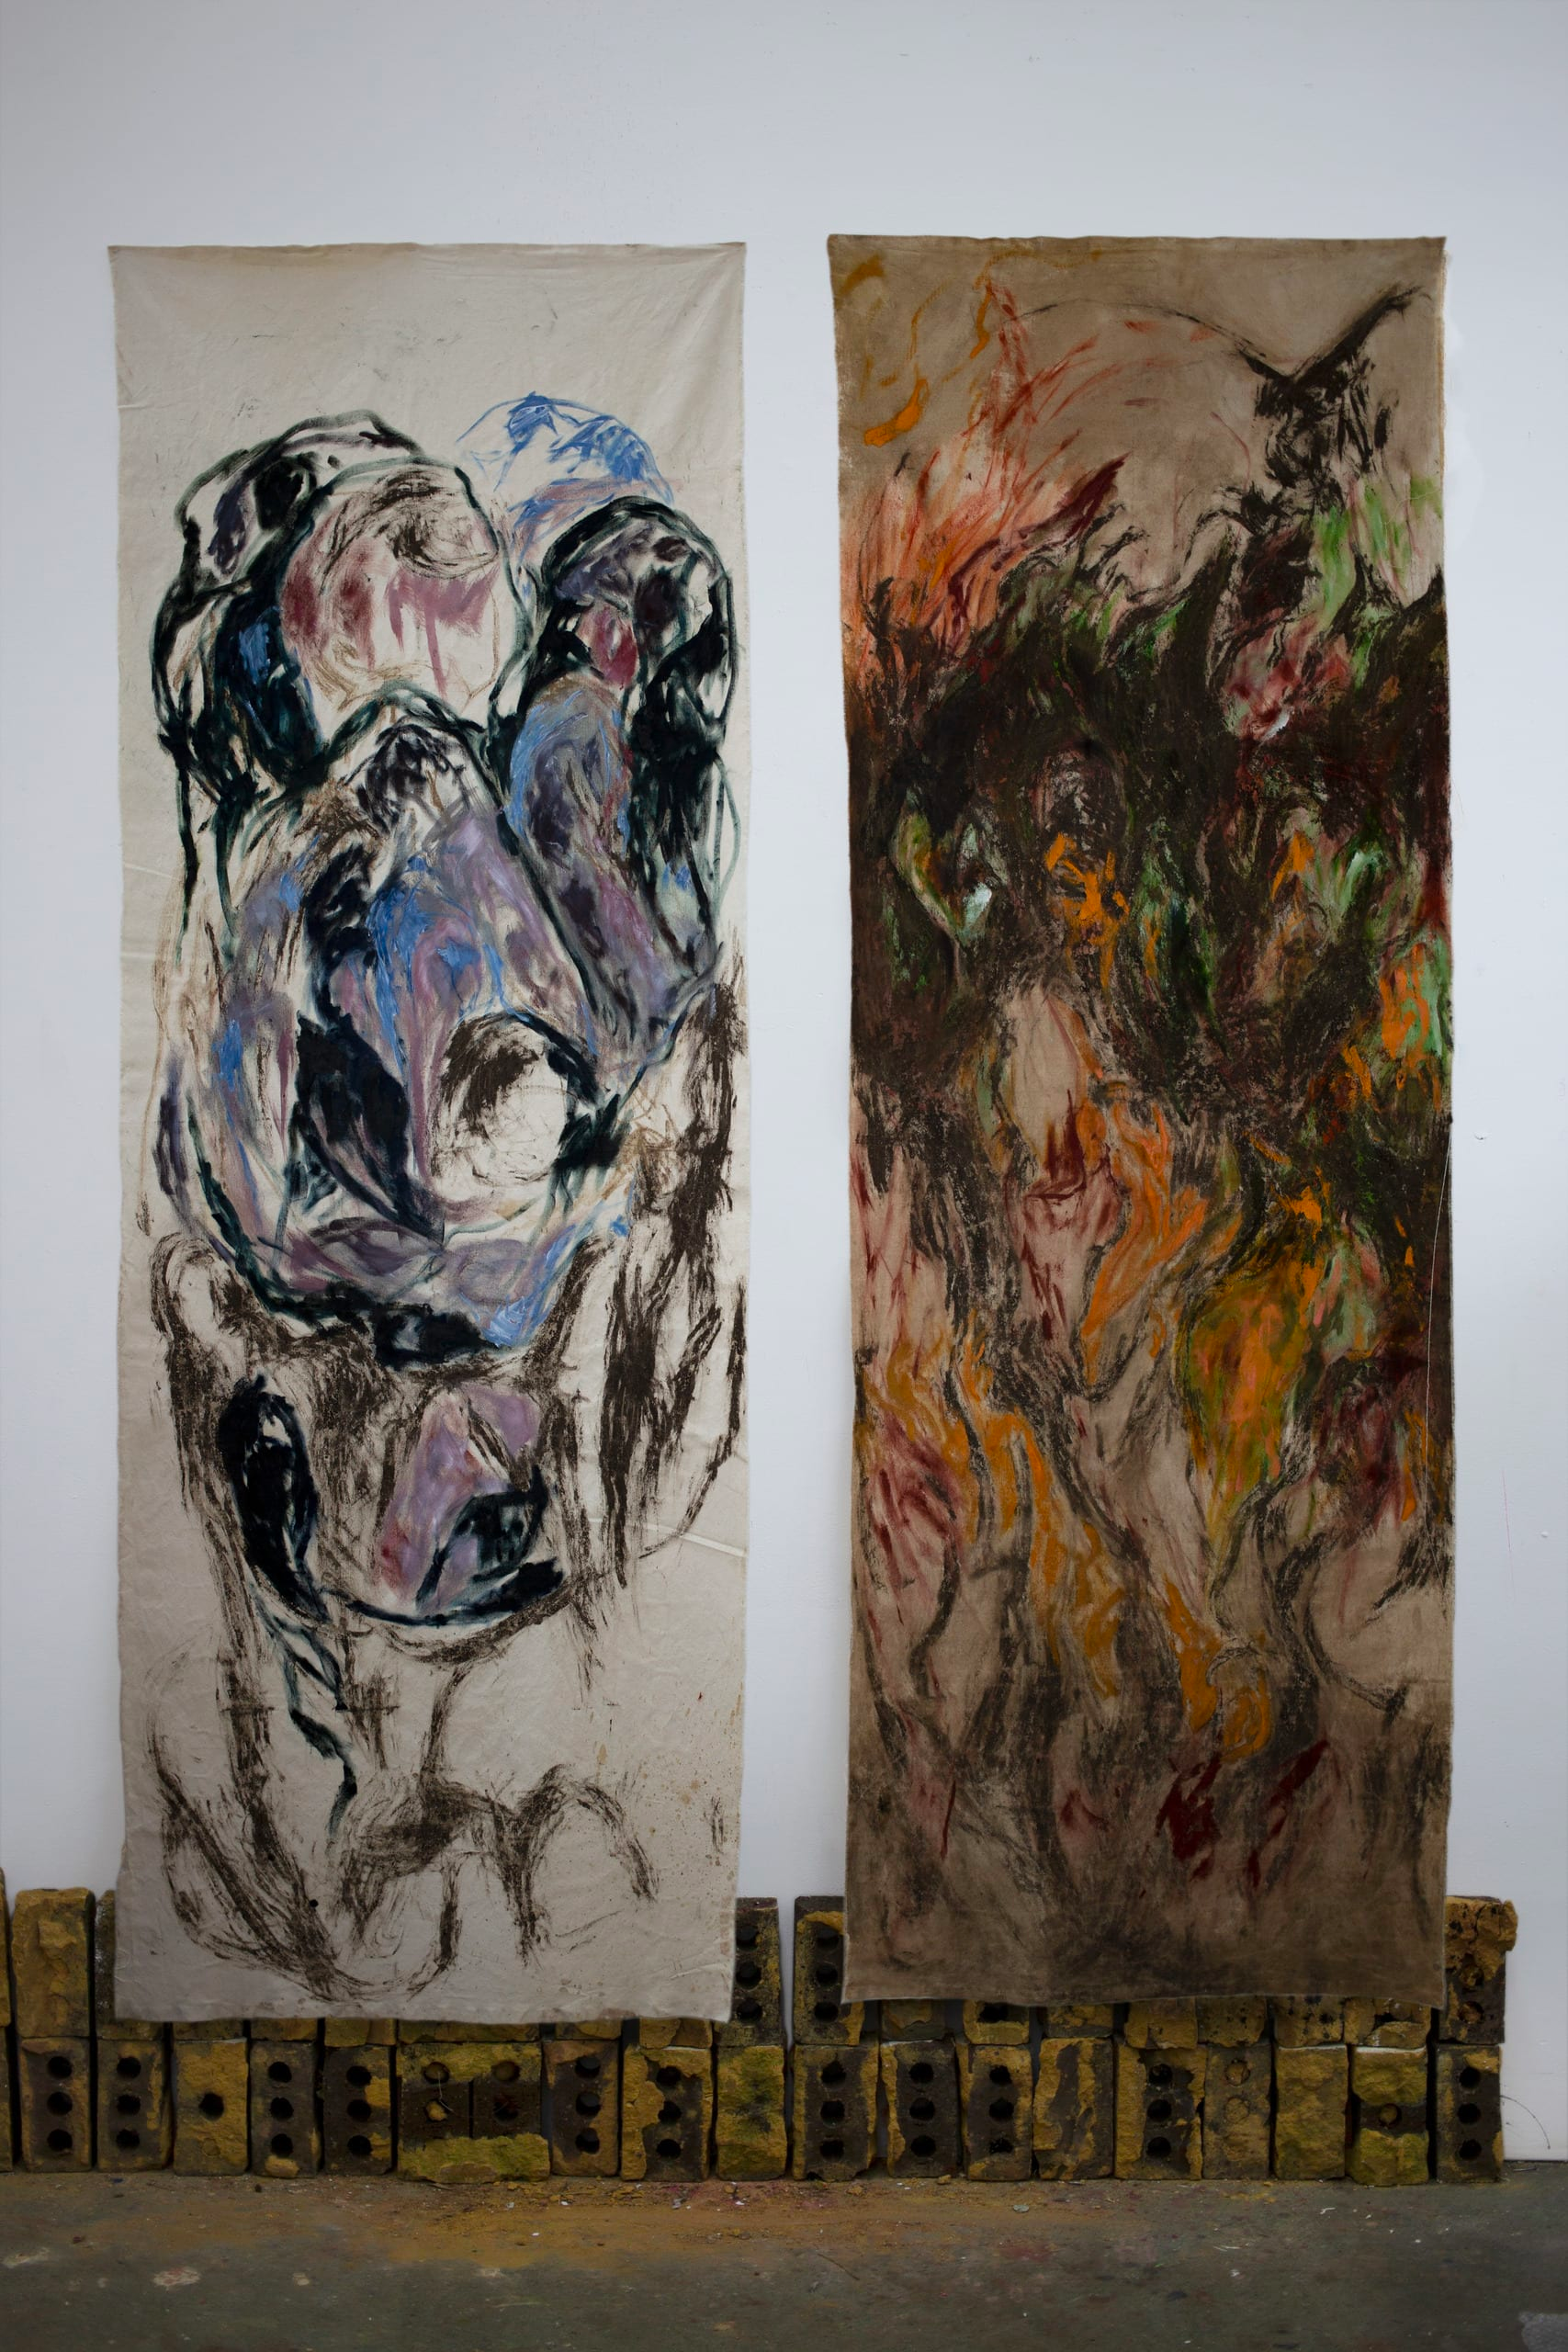 Photograph of two rectangular abstract paintings, on what looks like cloth, hanging on a wall, side by side, one in shades of blue, pink and black, the other in fiery orange, red, green and black.